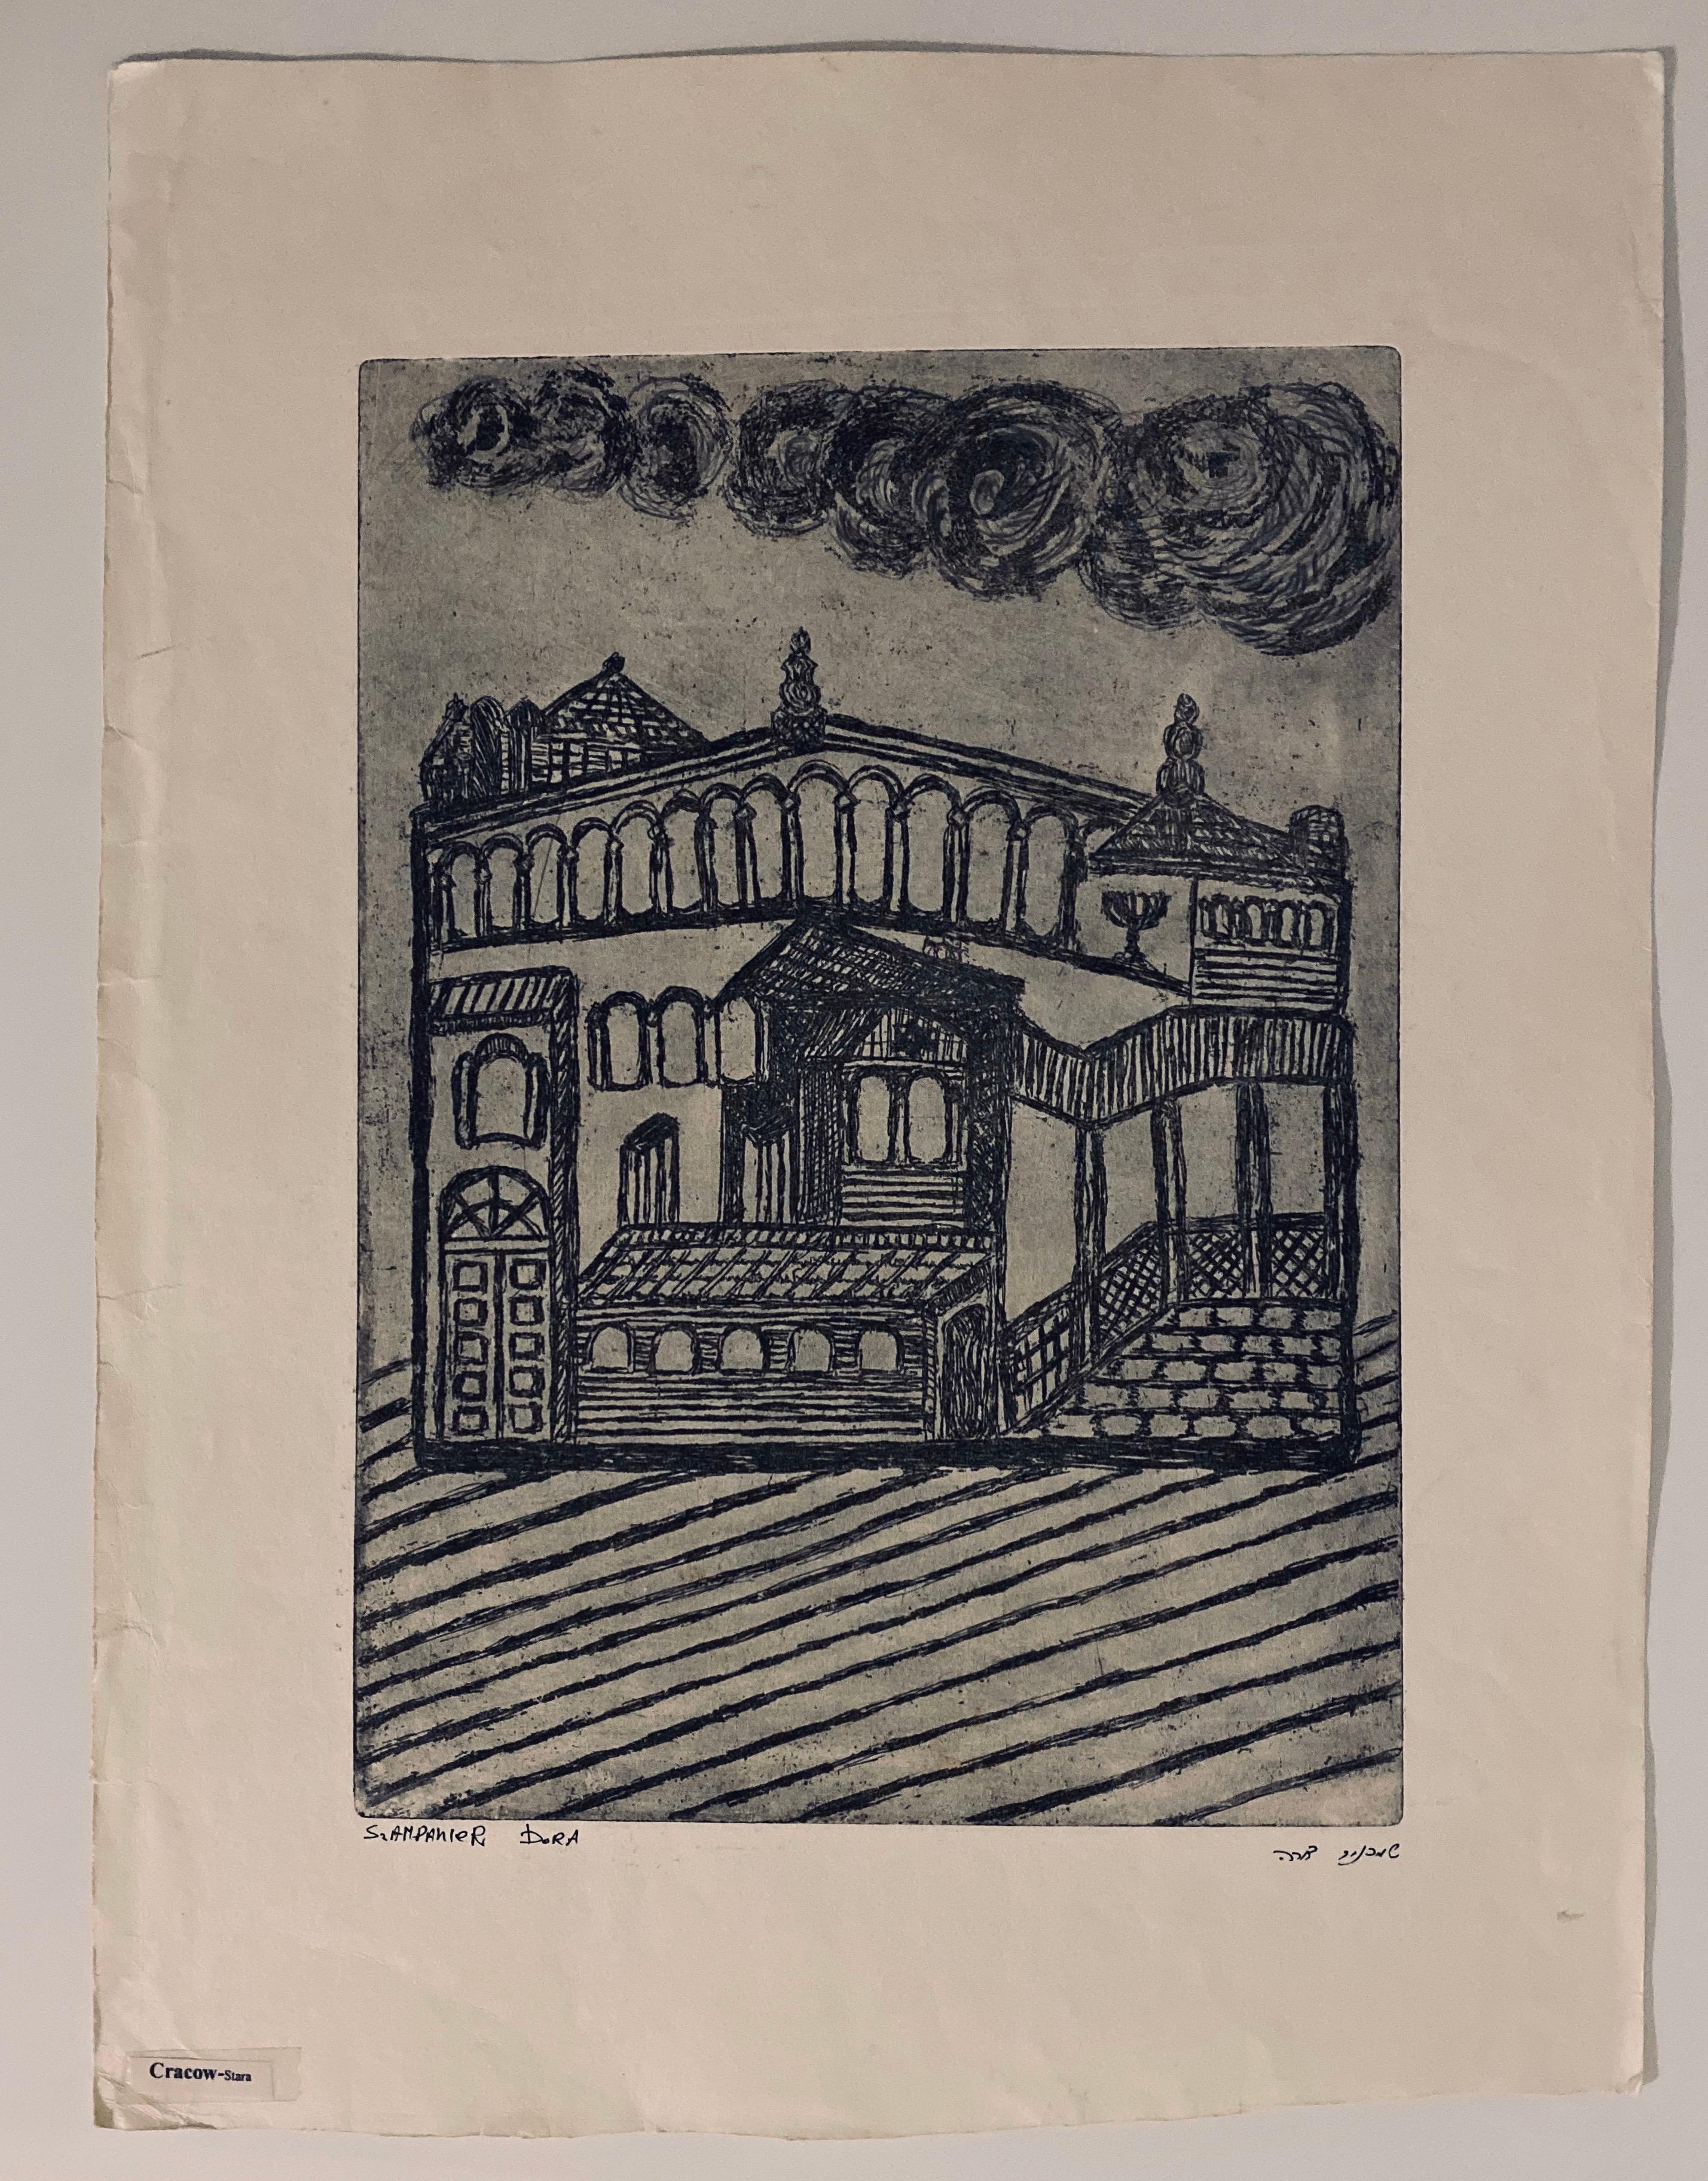 Cracow Poland Etching of Polish Synagogue, Jewish temple. From very rare small edition. Most are signed in Hebrew and /or English. some are marked AP some are numbered. please see photos.
Dora Szampanier (Shampanier, nee Mondschein) born 1922, a